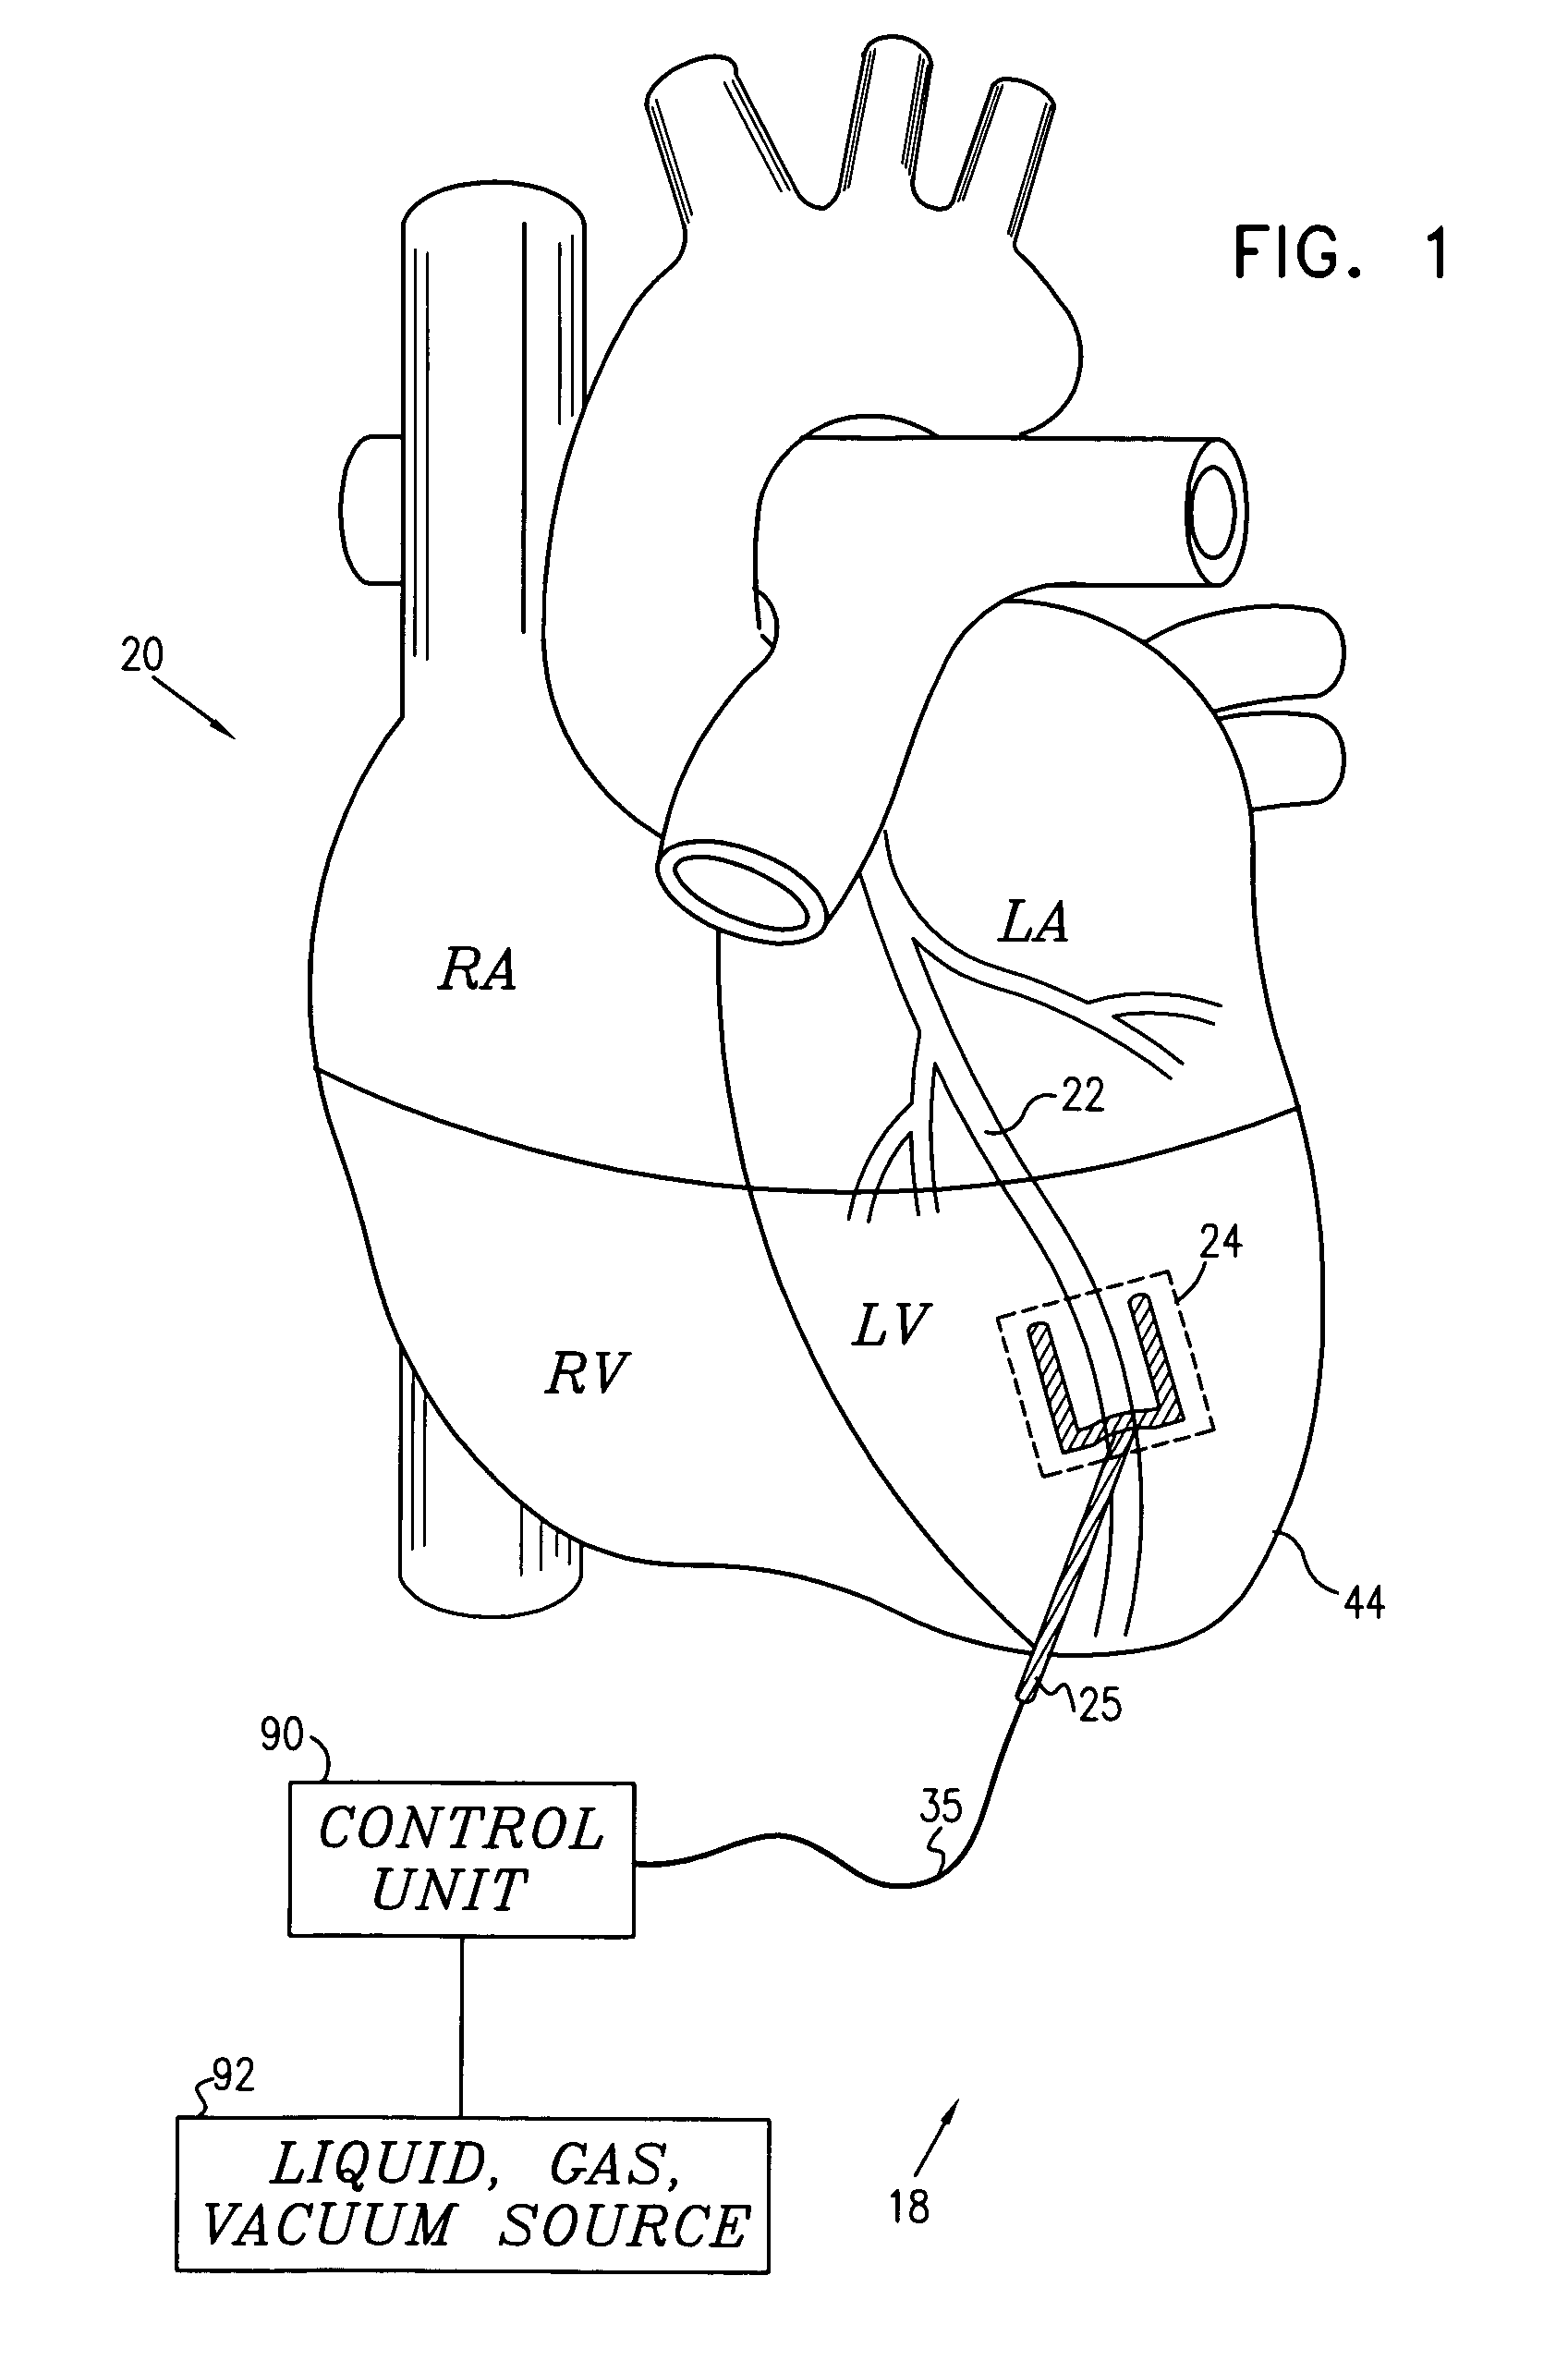 Local cardiac motion control using applied electrical signals and mechanical force